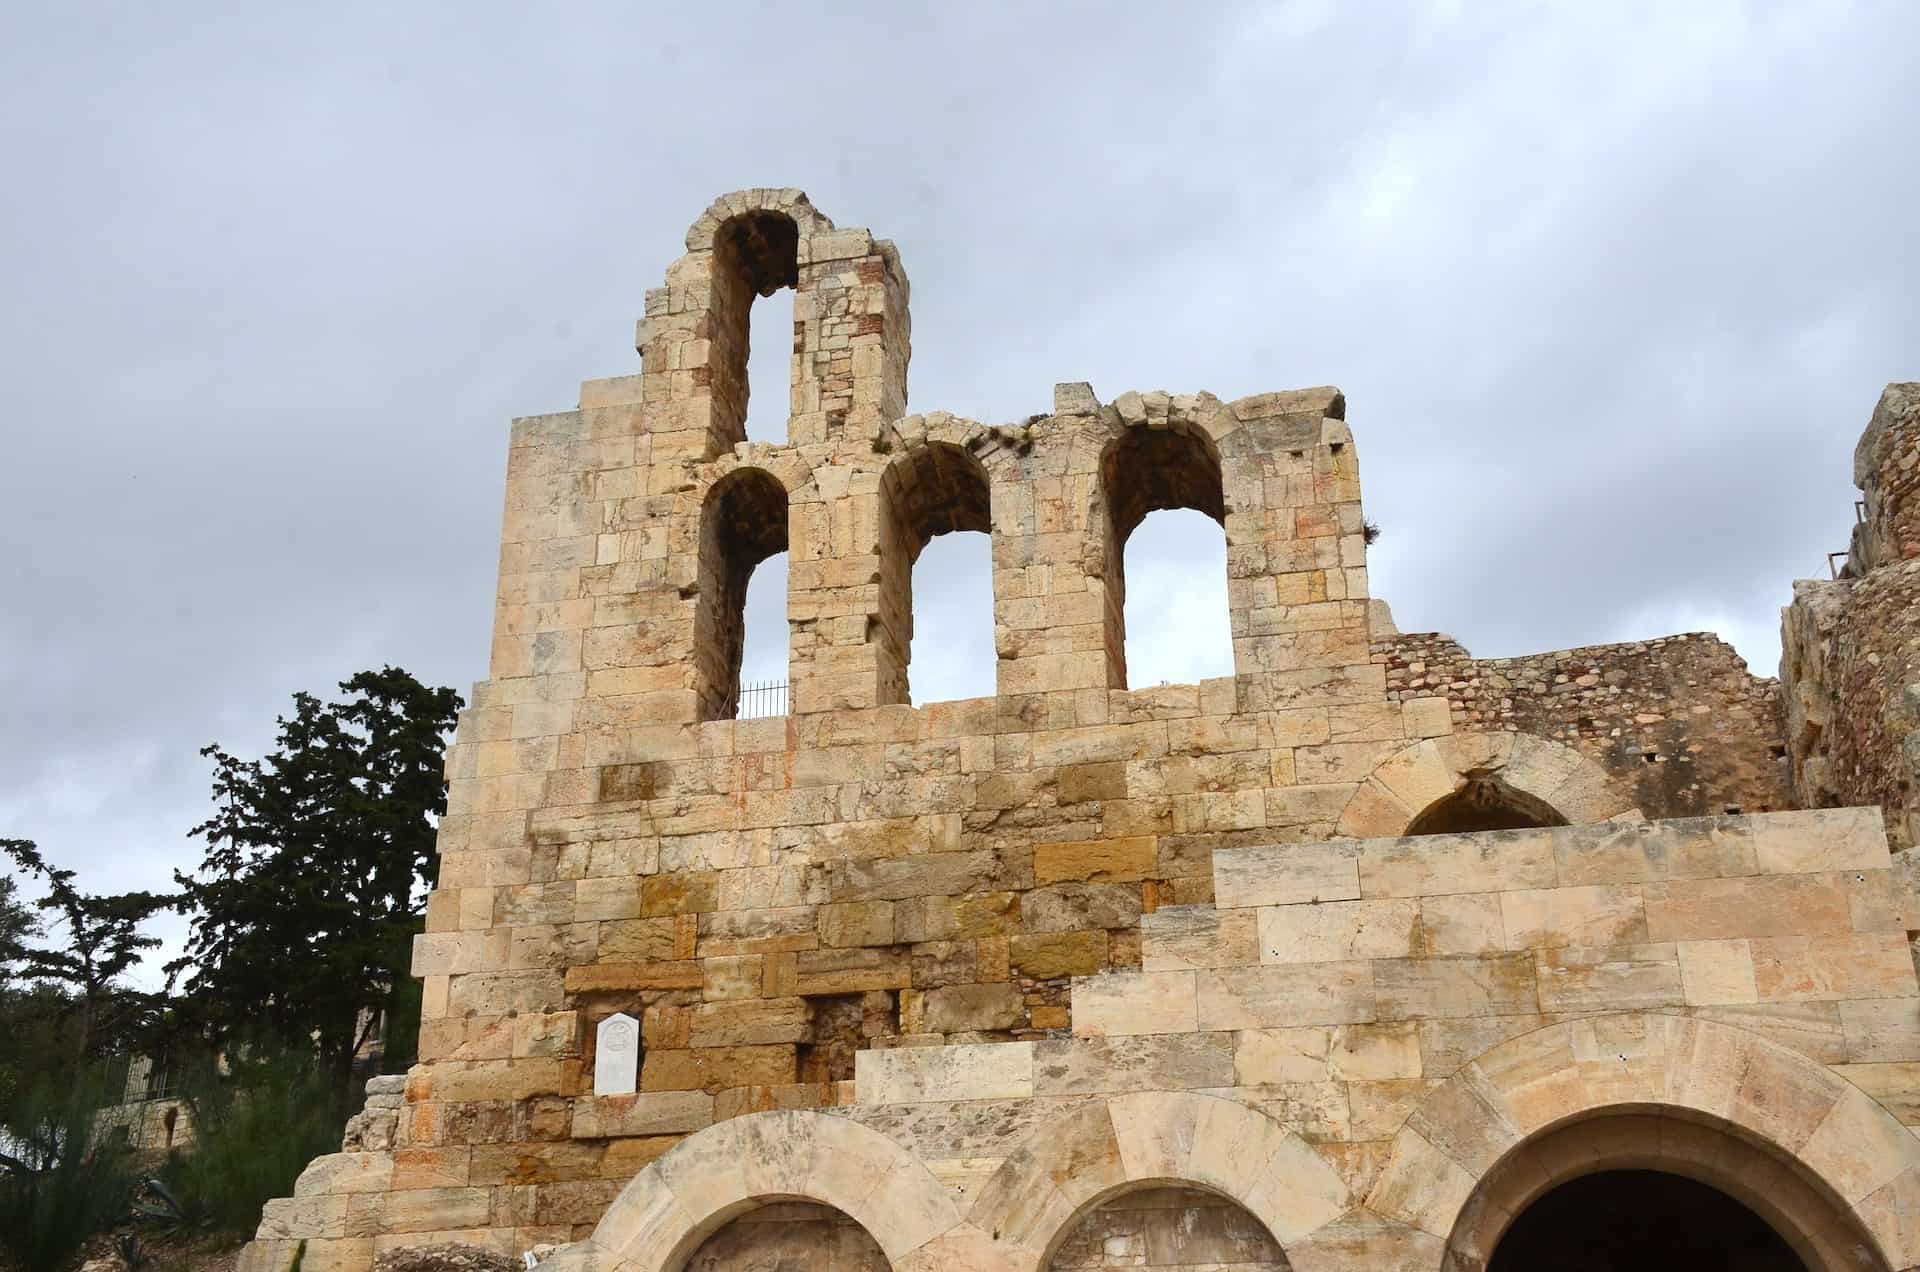 West side of the façade of the Odeon of Herodes Atticus